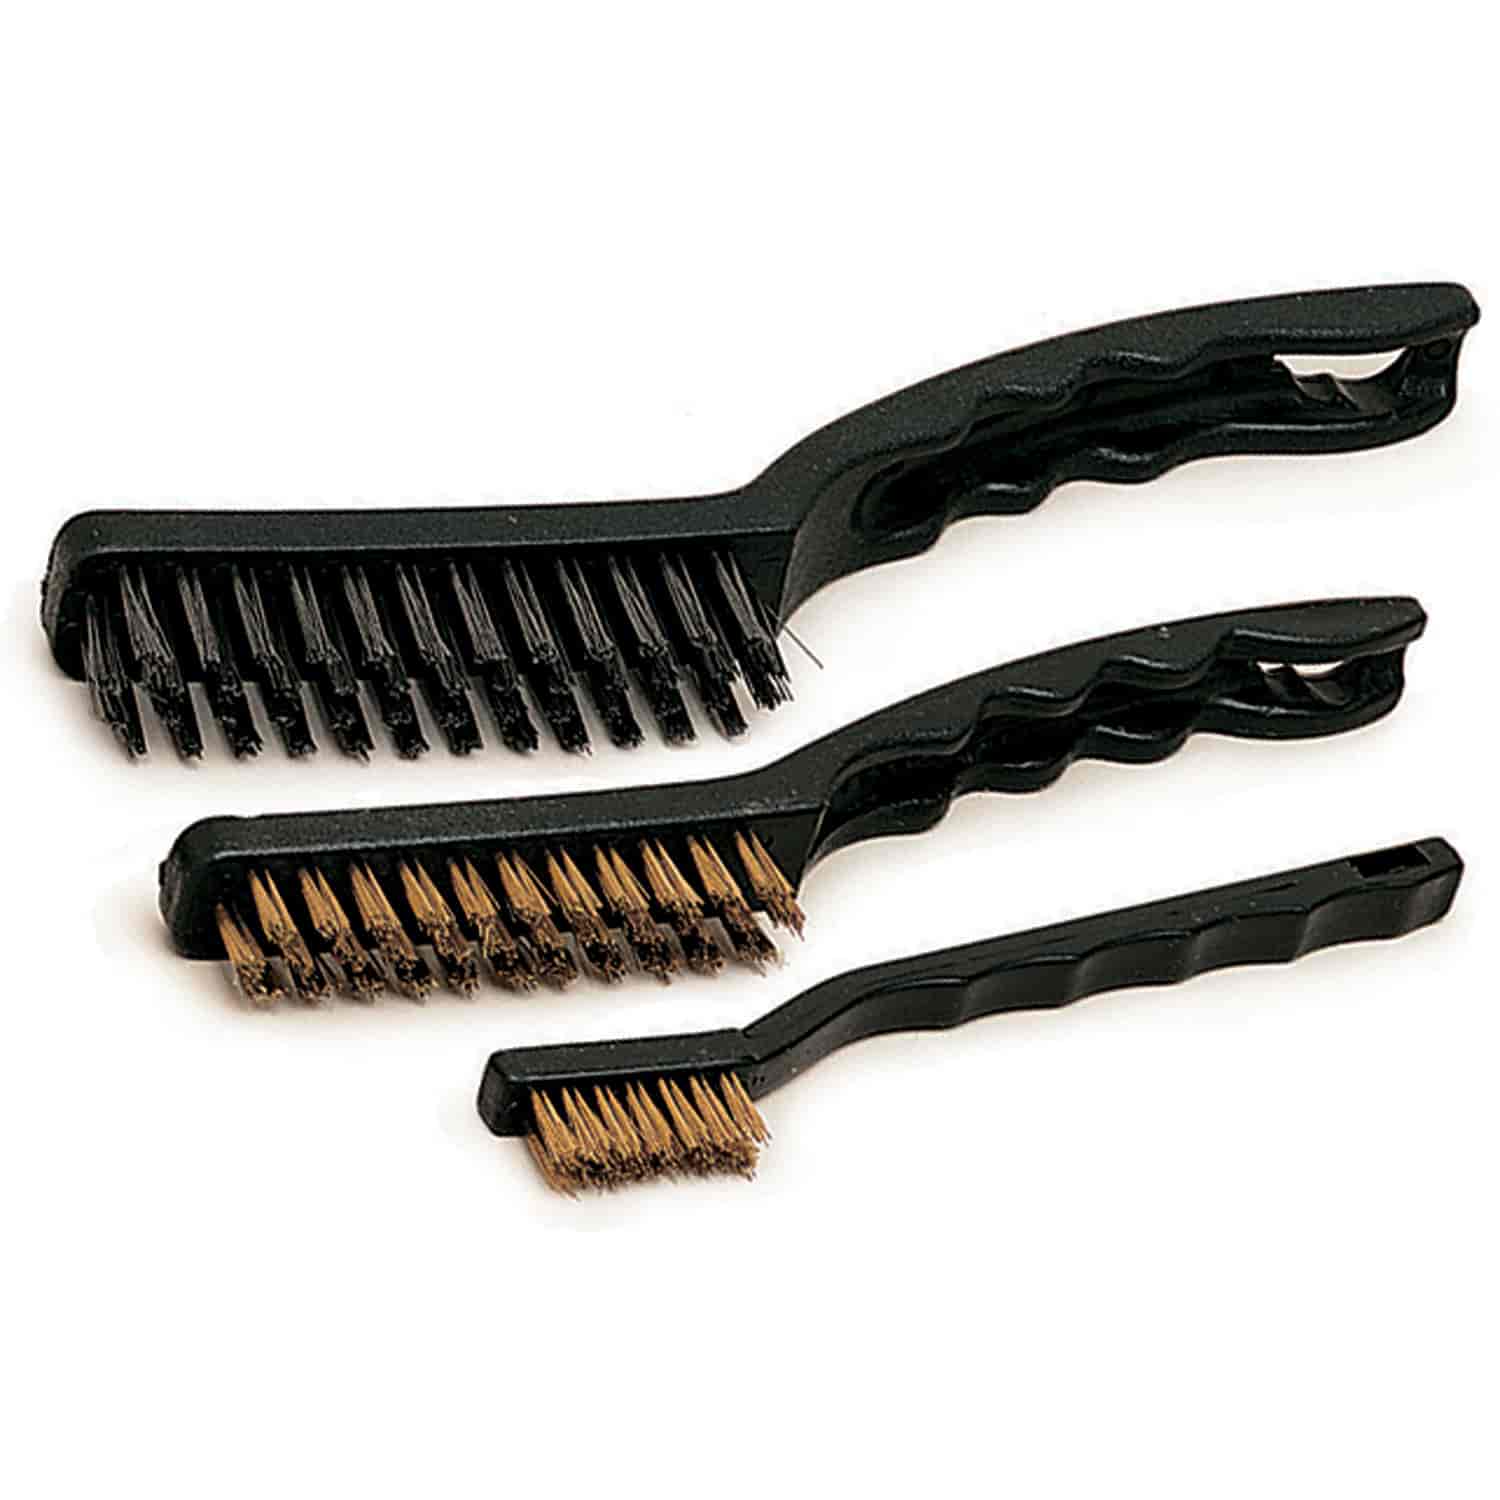 3-Piece Wire Brush Set [Stainless Steel, Brass Bristles with Plastic Handle]